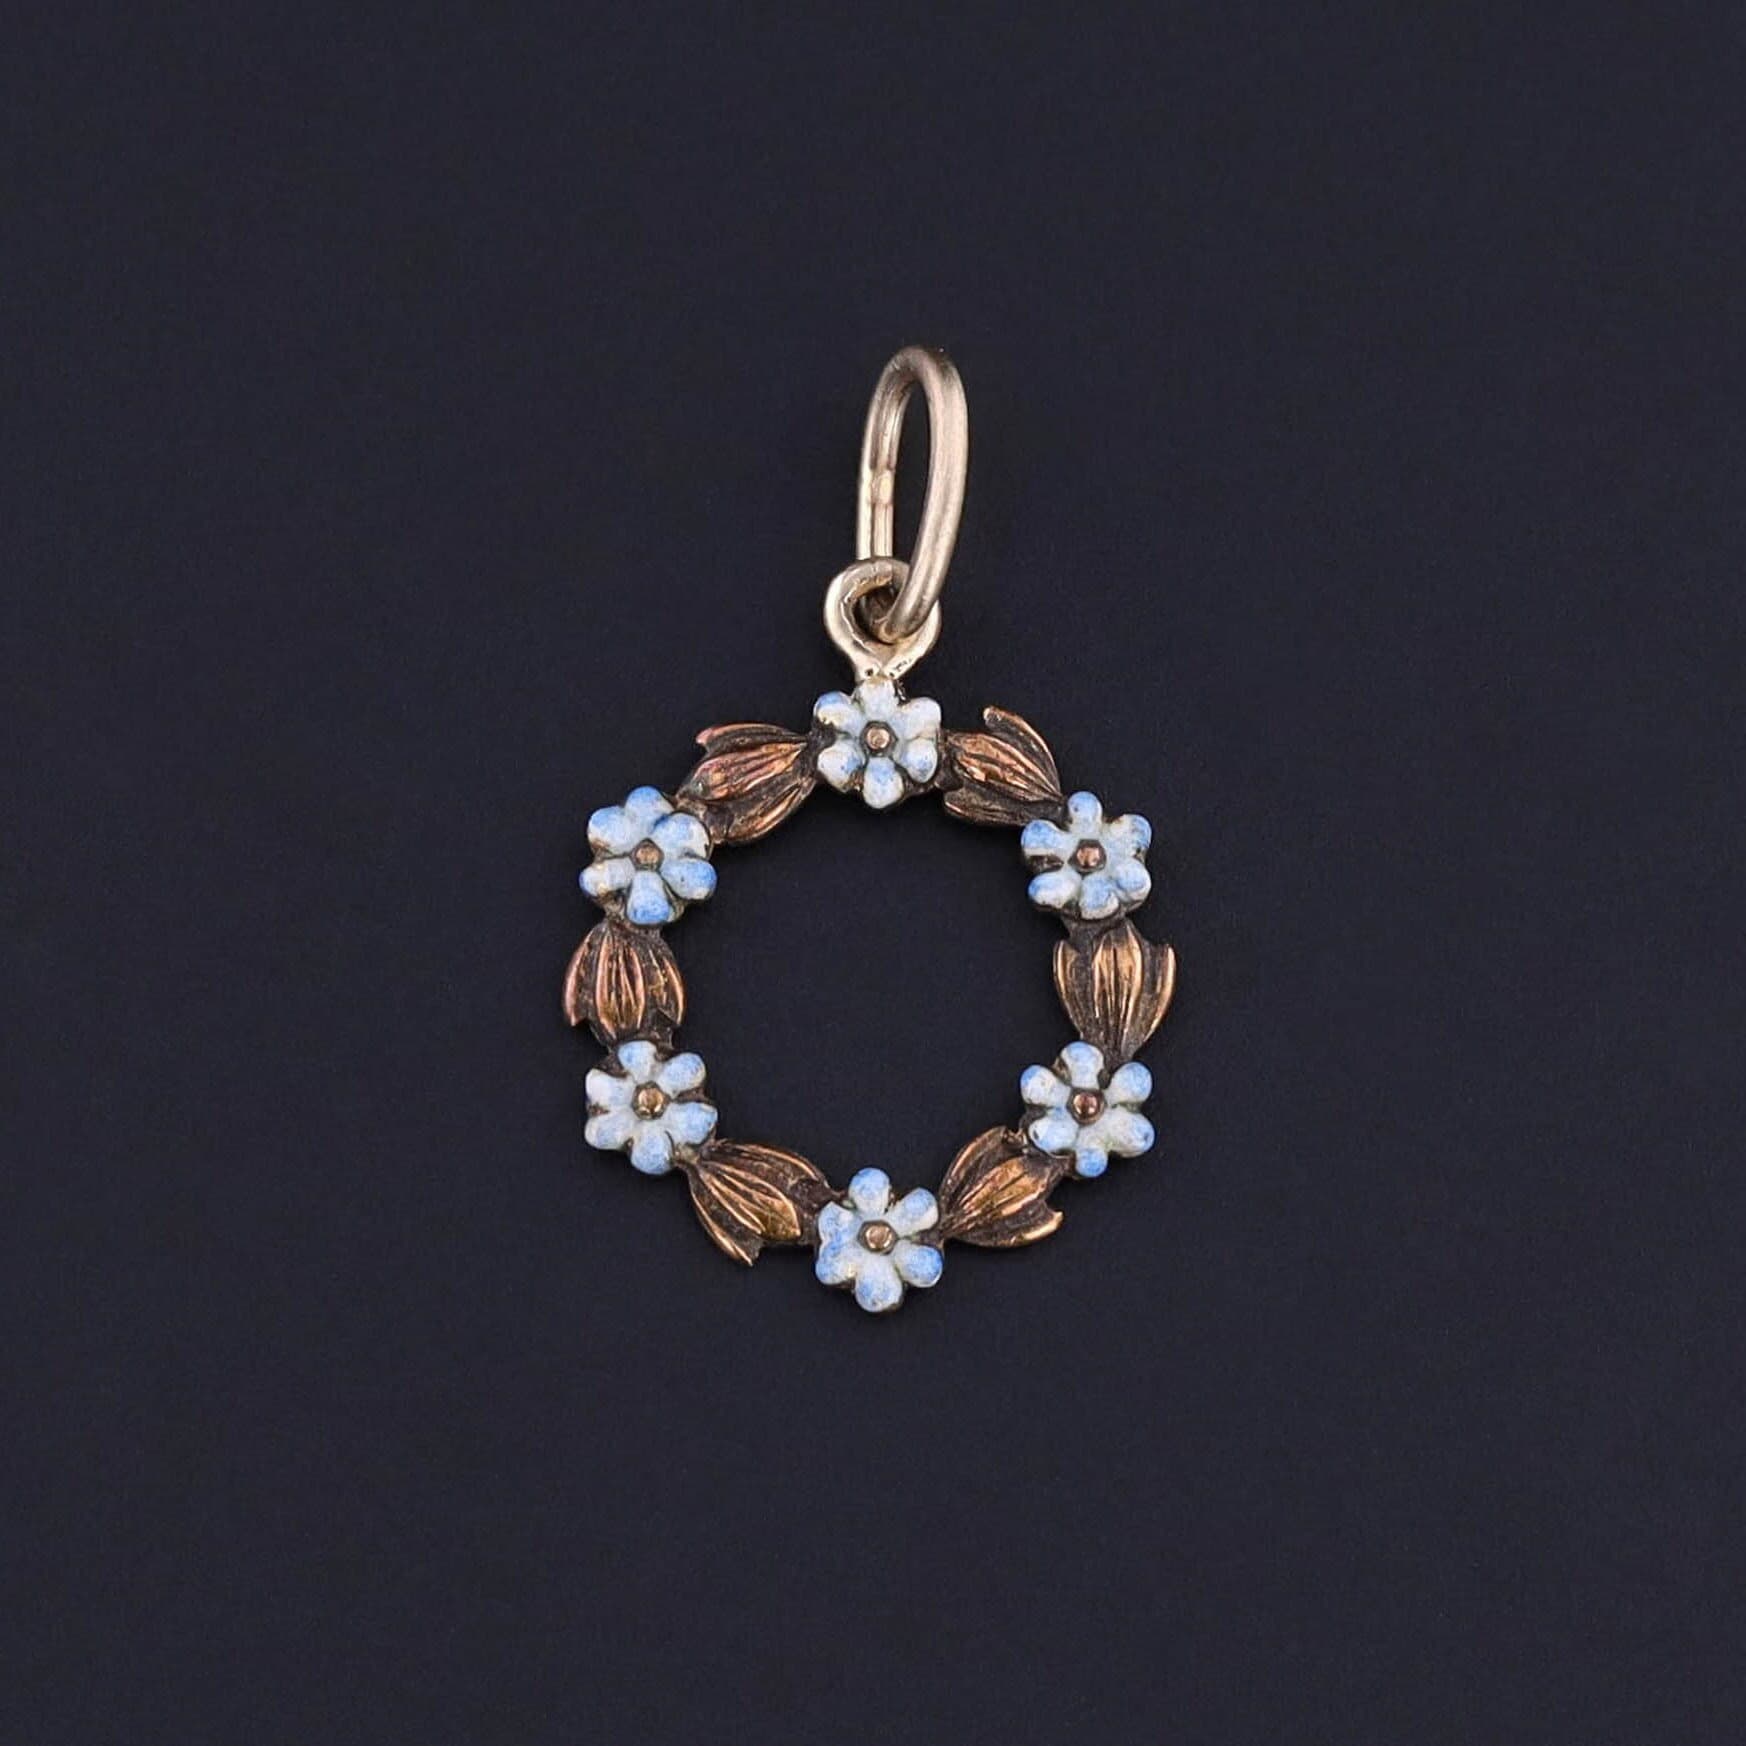 Antique Forget-me-not Charm of 14k Gold